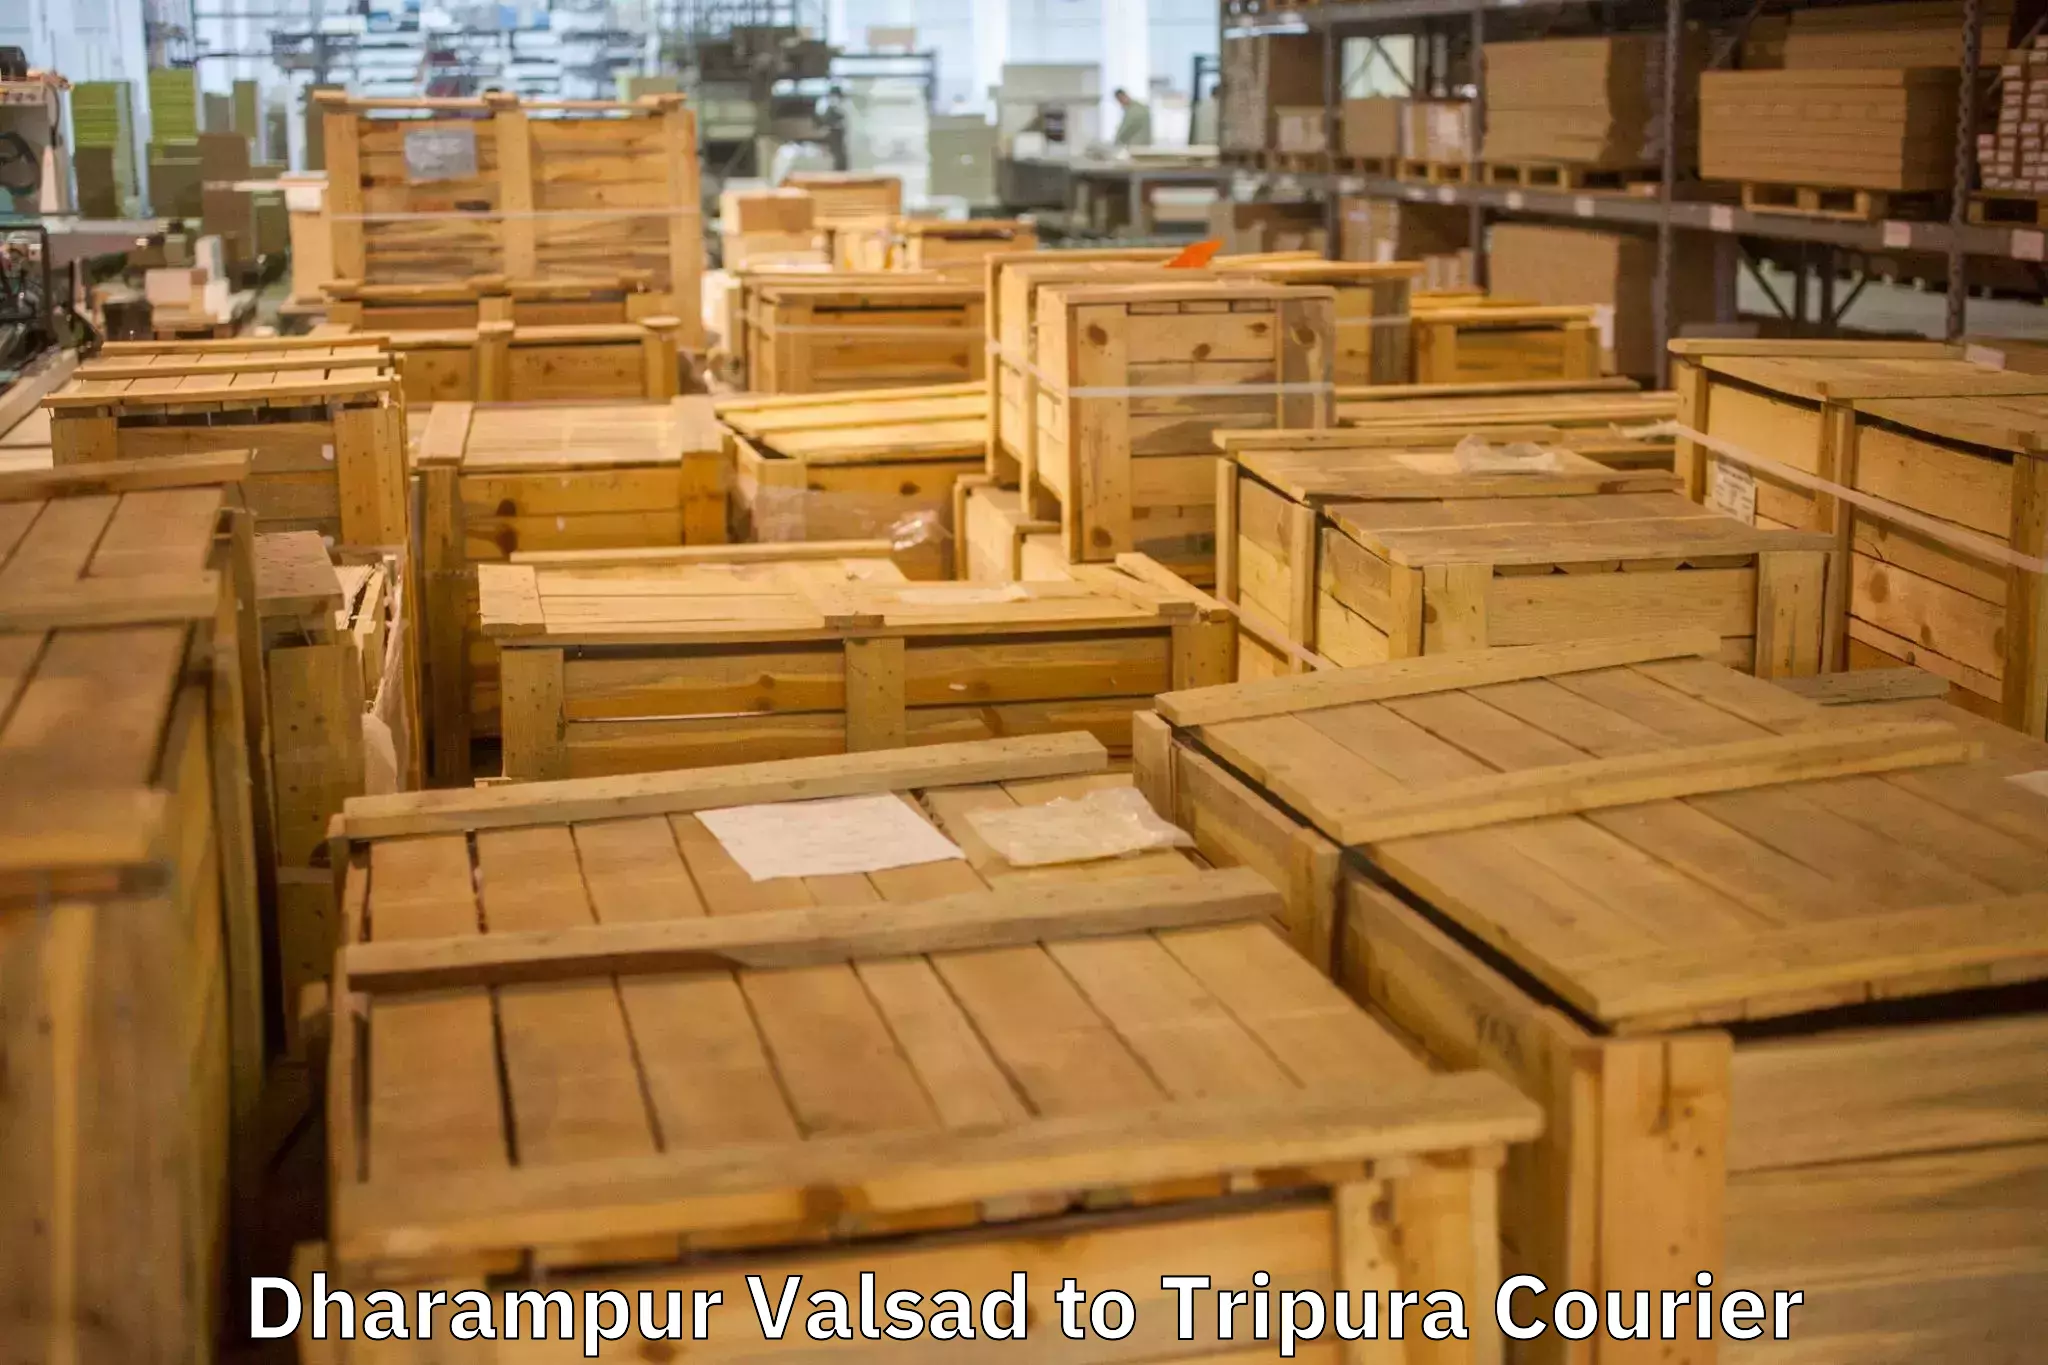 Stress-free household moving in Dharampur Valsad to Tripura